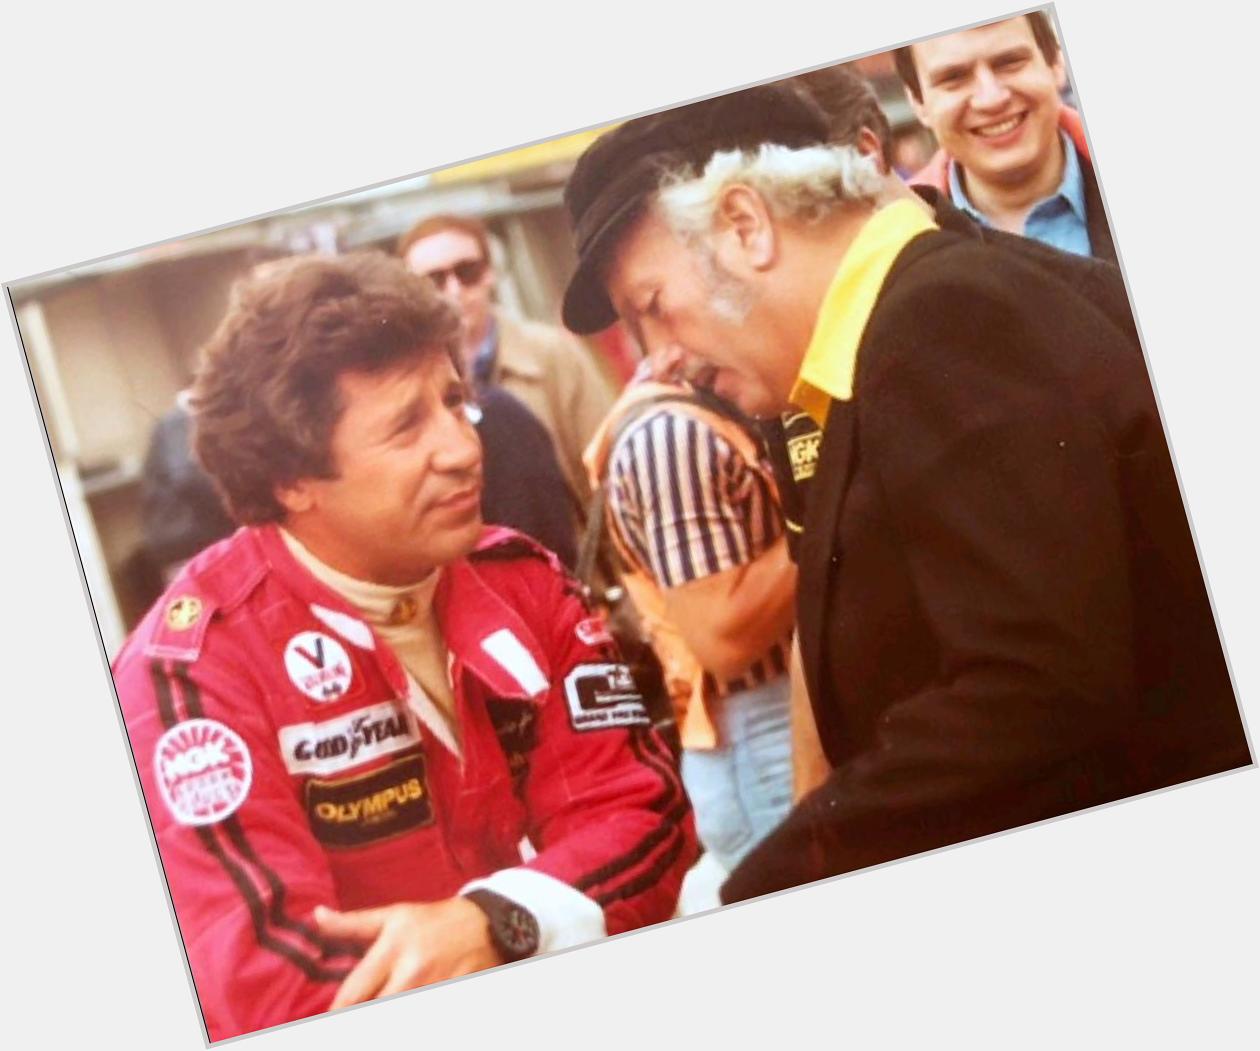 Happy Birthday Mario Andretti
Pictured with Colin Chapman 
Early JPS Dream Team     